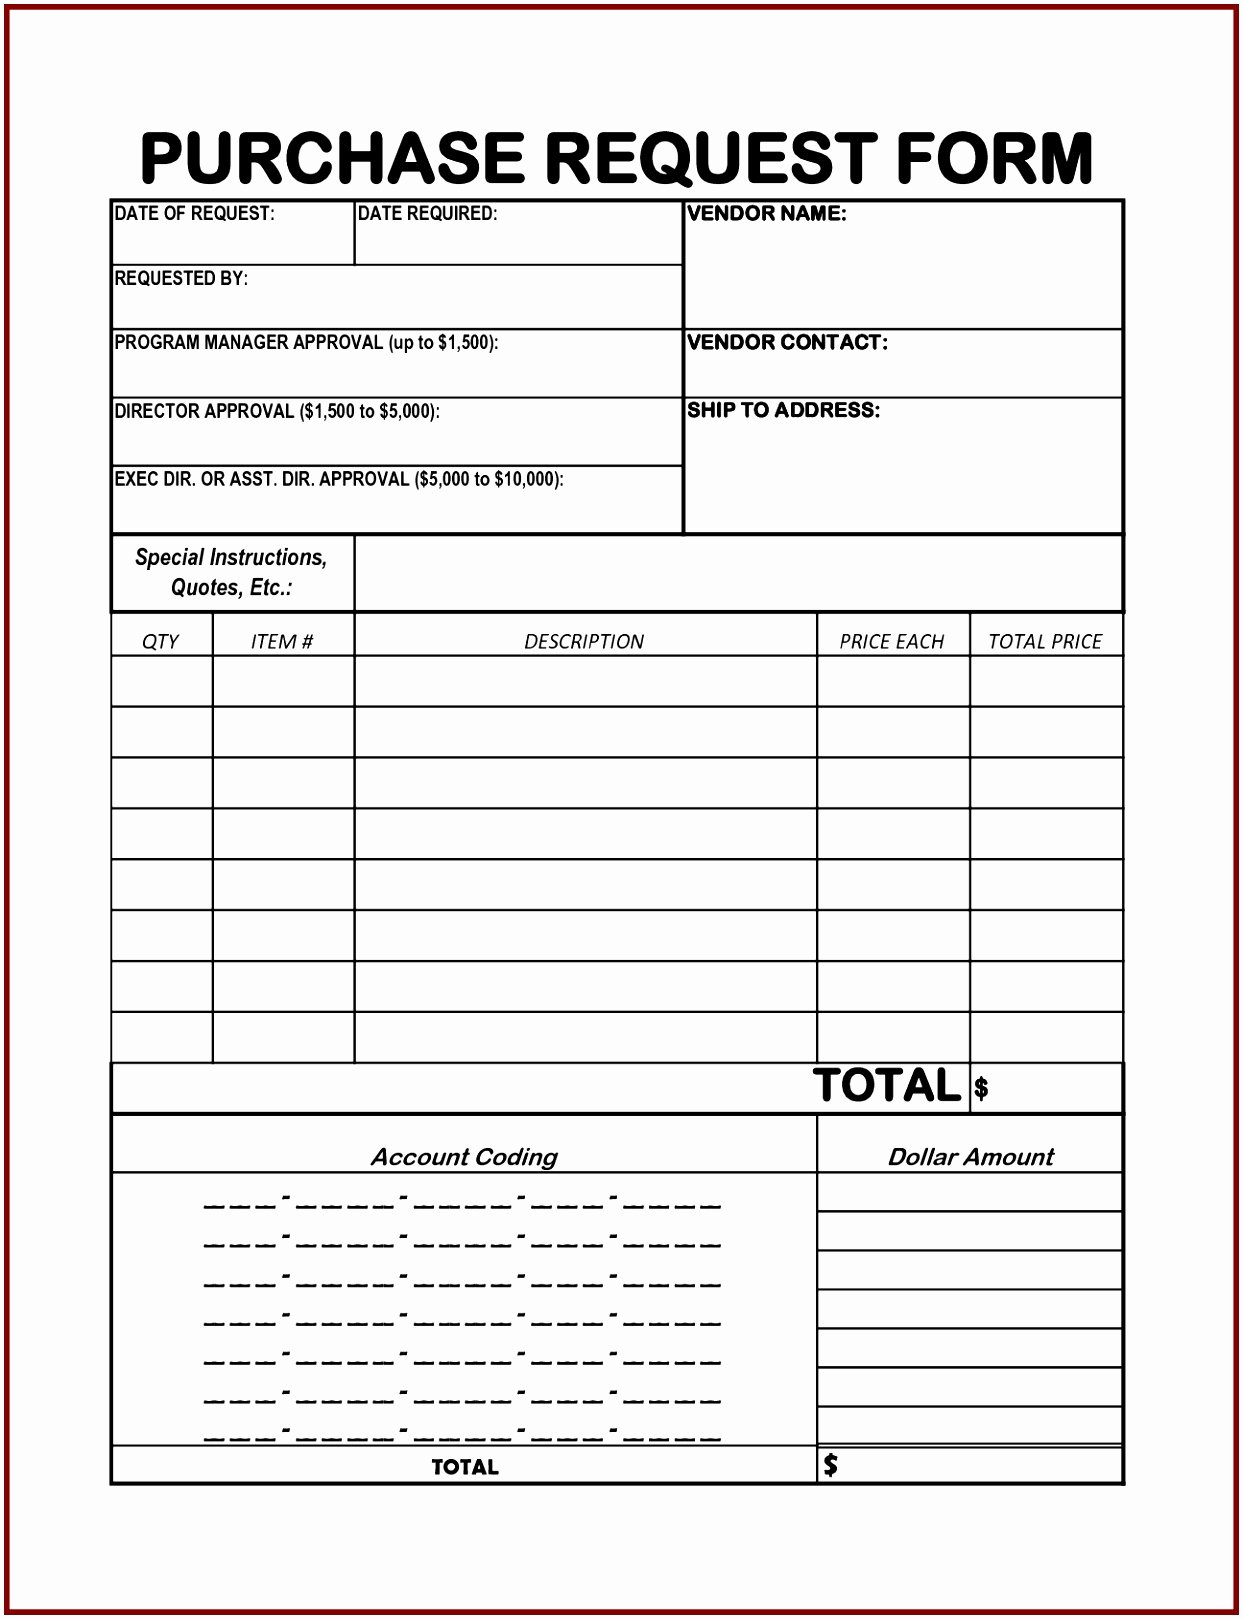 12 Purchase order Requisition form Template Pwphu